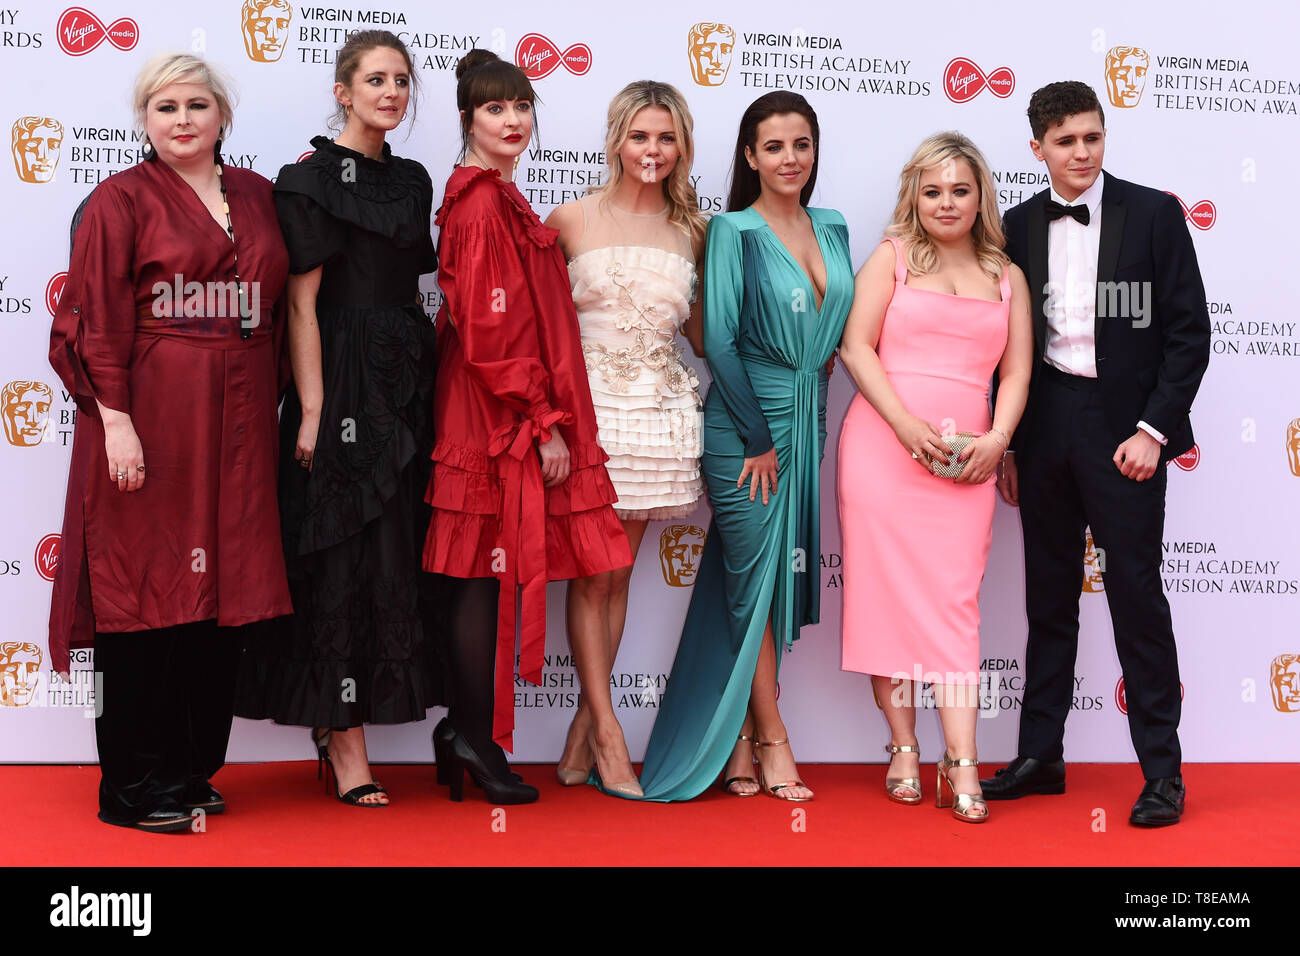 LONDON, UK. May 12, 2019: Derry Girls cast (Siobhan McSweeney, Louisa Harland, Kathy Kiera Clarke, Saoirse-Monica Jackson, Jamie-Lee O'Donnell, Nicola Coughlan & Dylan Llewellyn) arriving for the BAFTA TV Awards 2019 at the Royal Festival Hall, London. Picture: Steve Vas/Featureflash Stock Photo